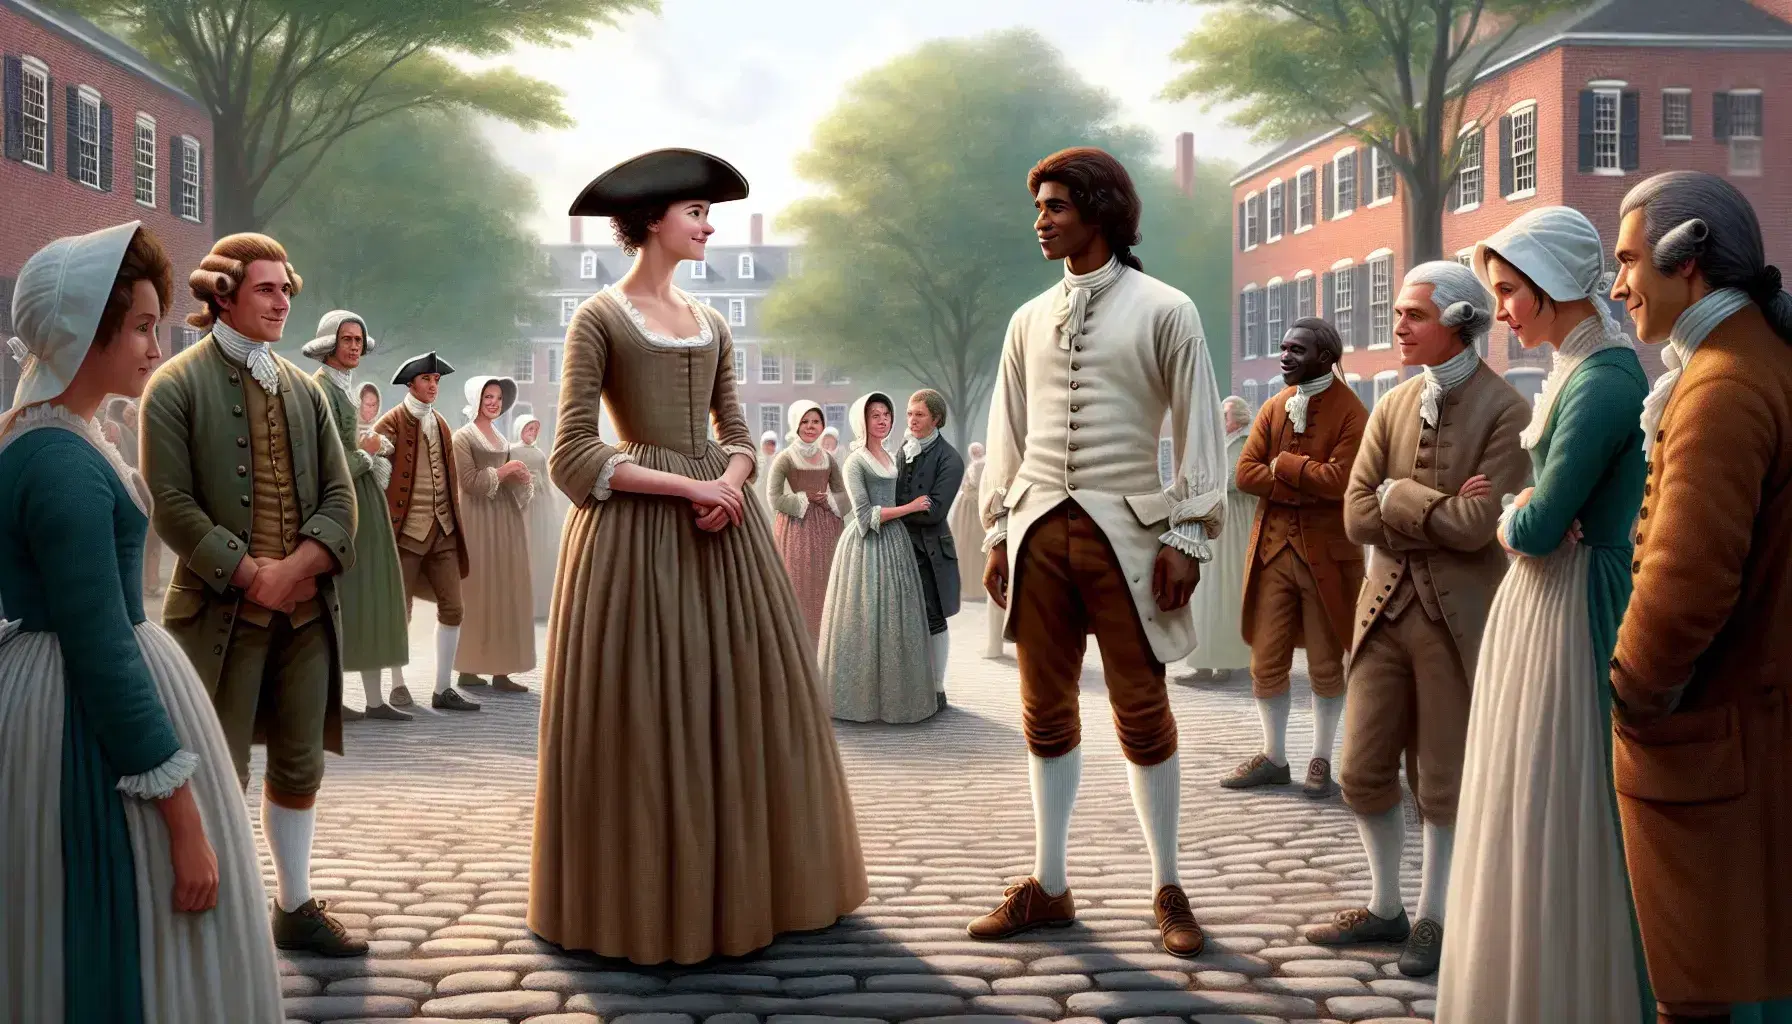 European woman in cream dress converses with African American man in plain clothes in American Revolutionary era public square, with colonial buildings.